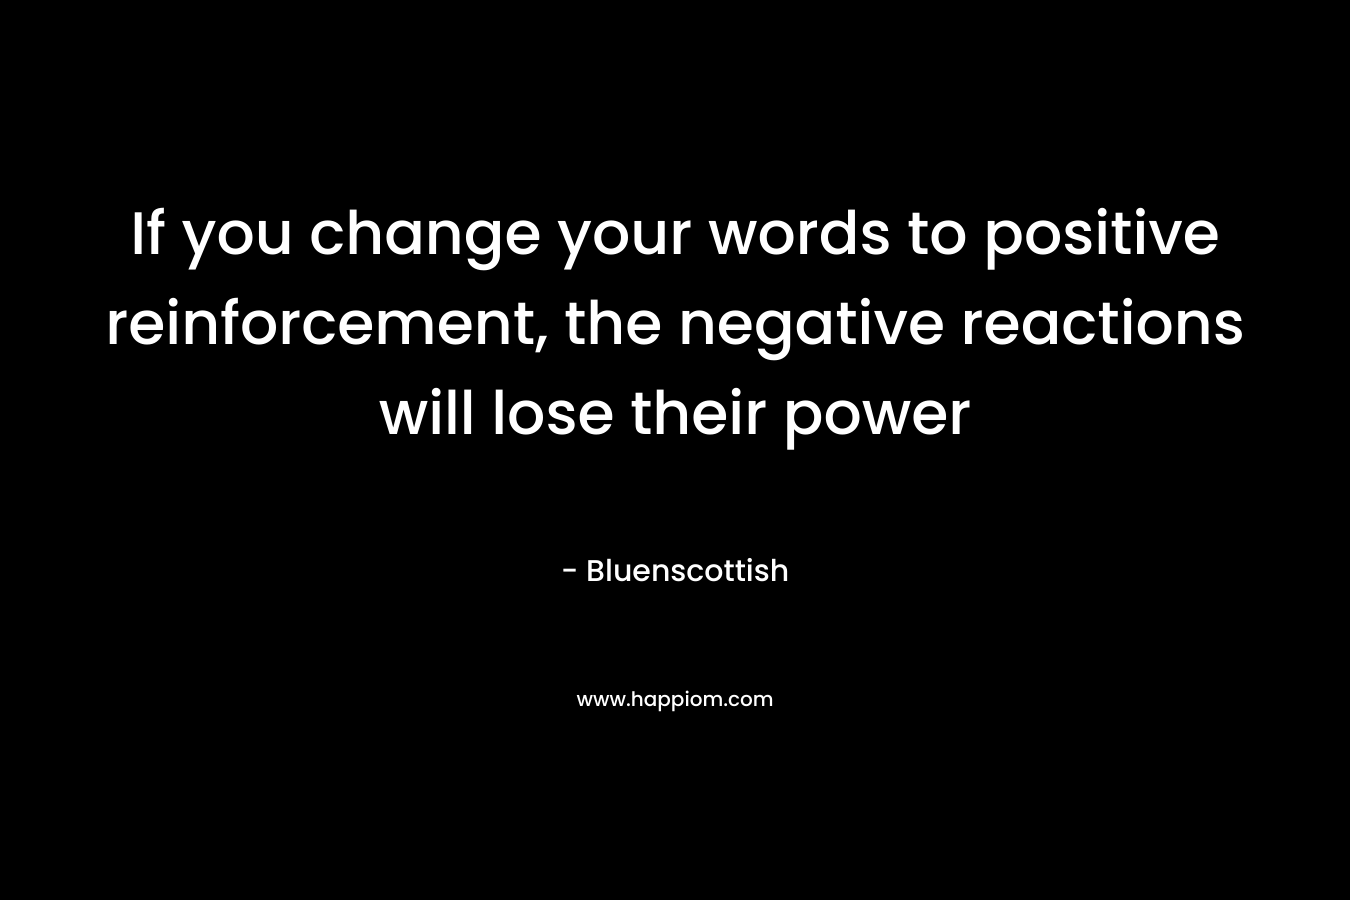 If you change your words to positive reinforcement, the negative reactions will lose their power